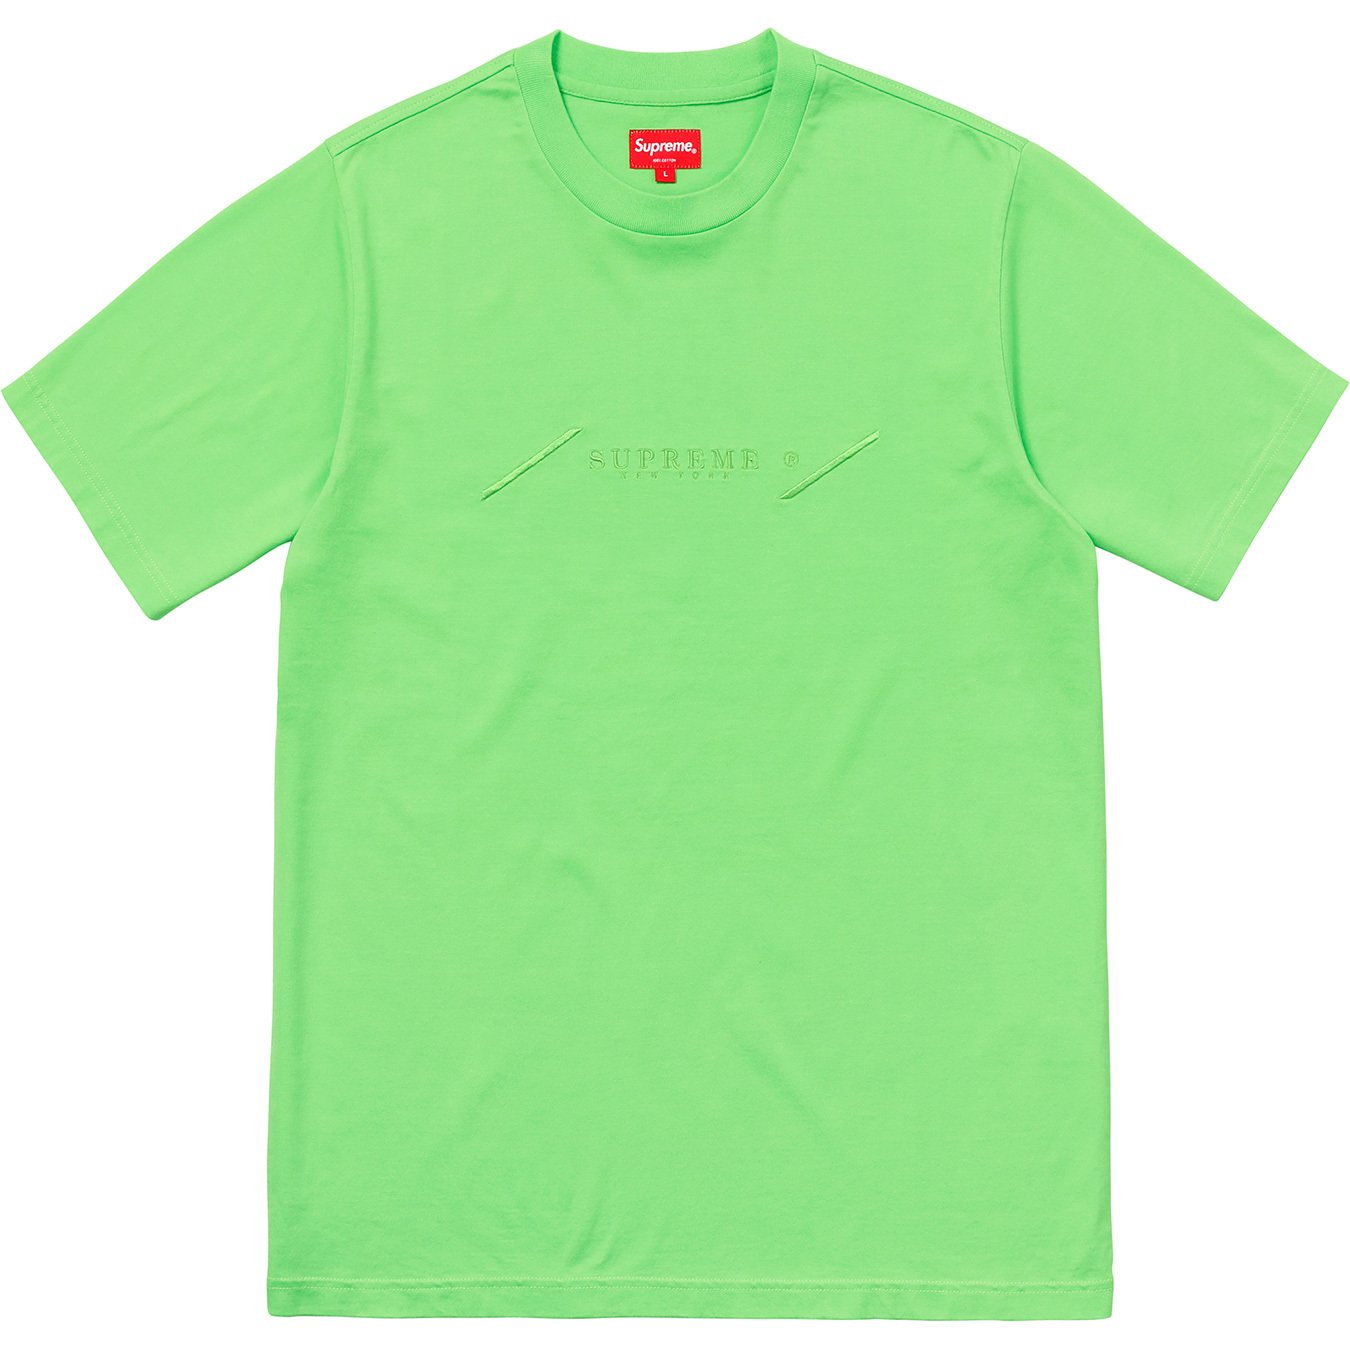 Supreme Tonal Embroidery Top Bright Green Men's   SS   US